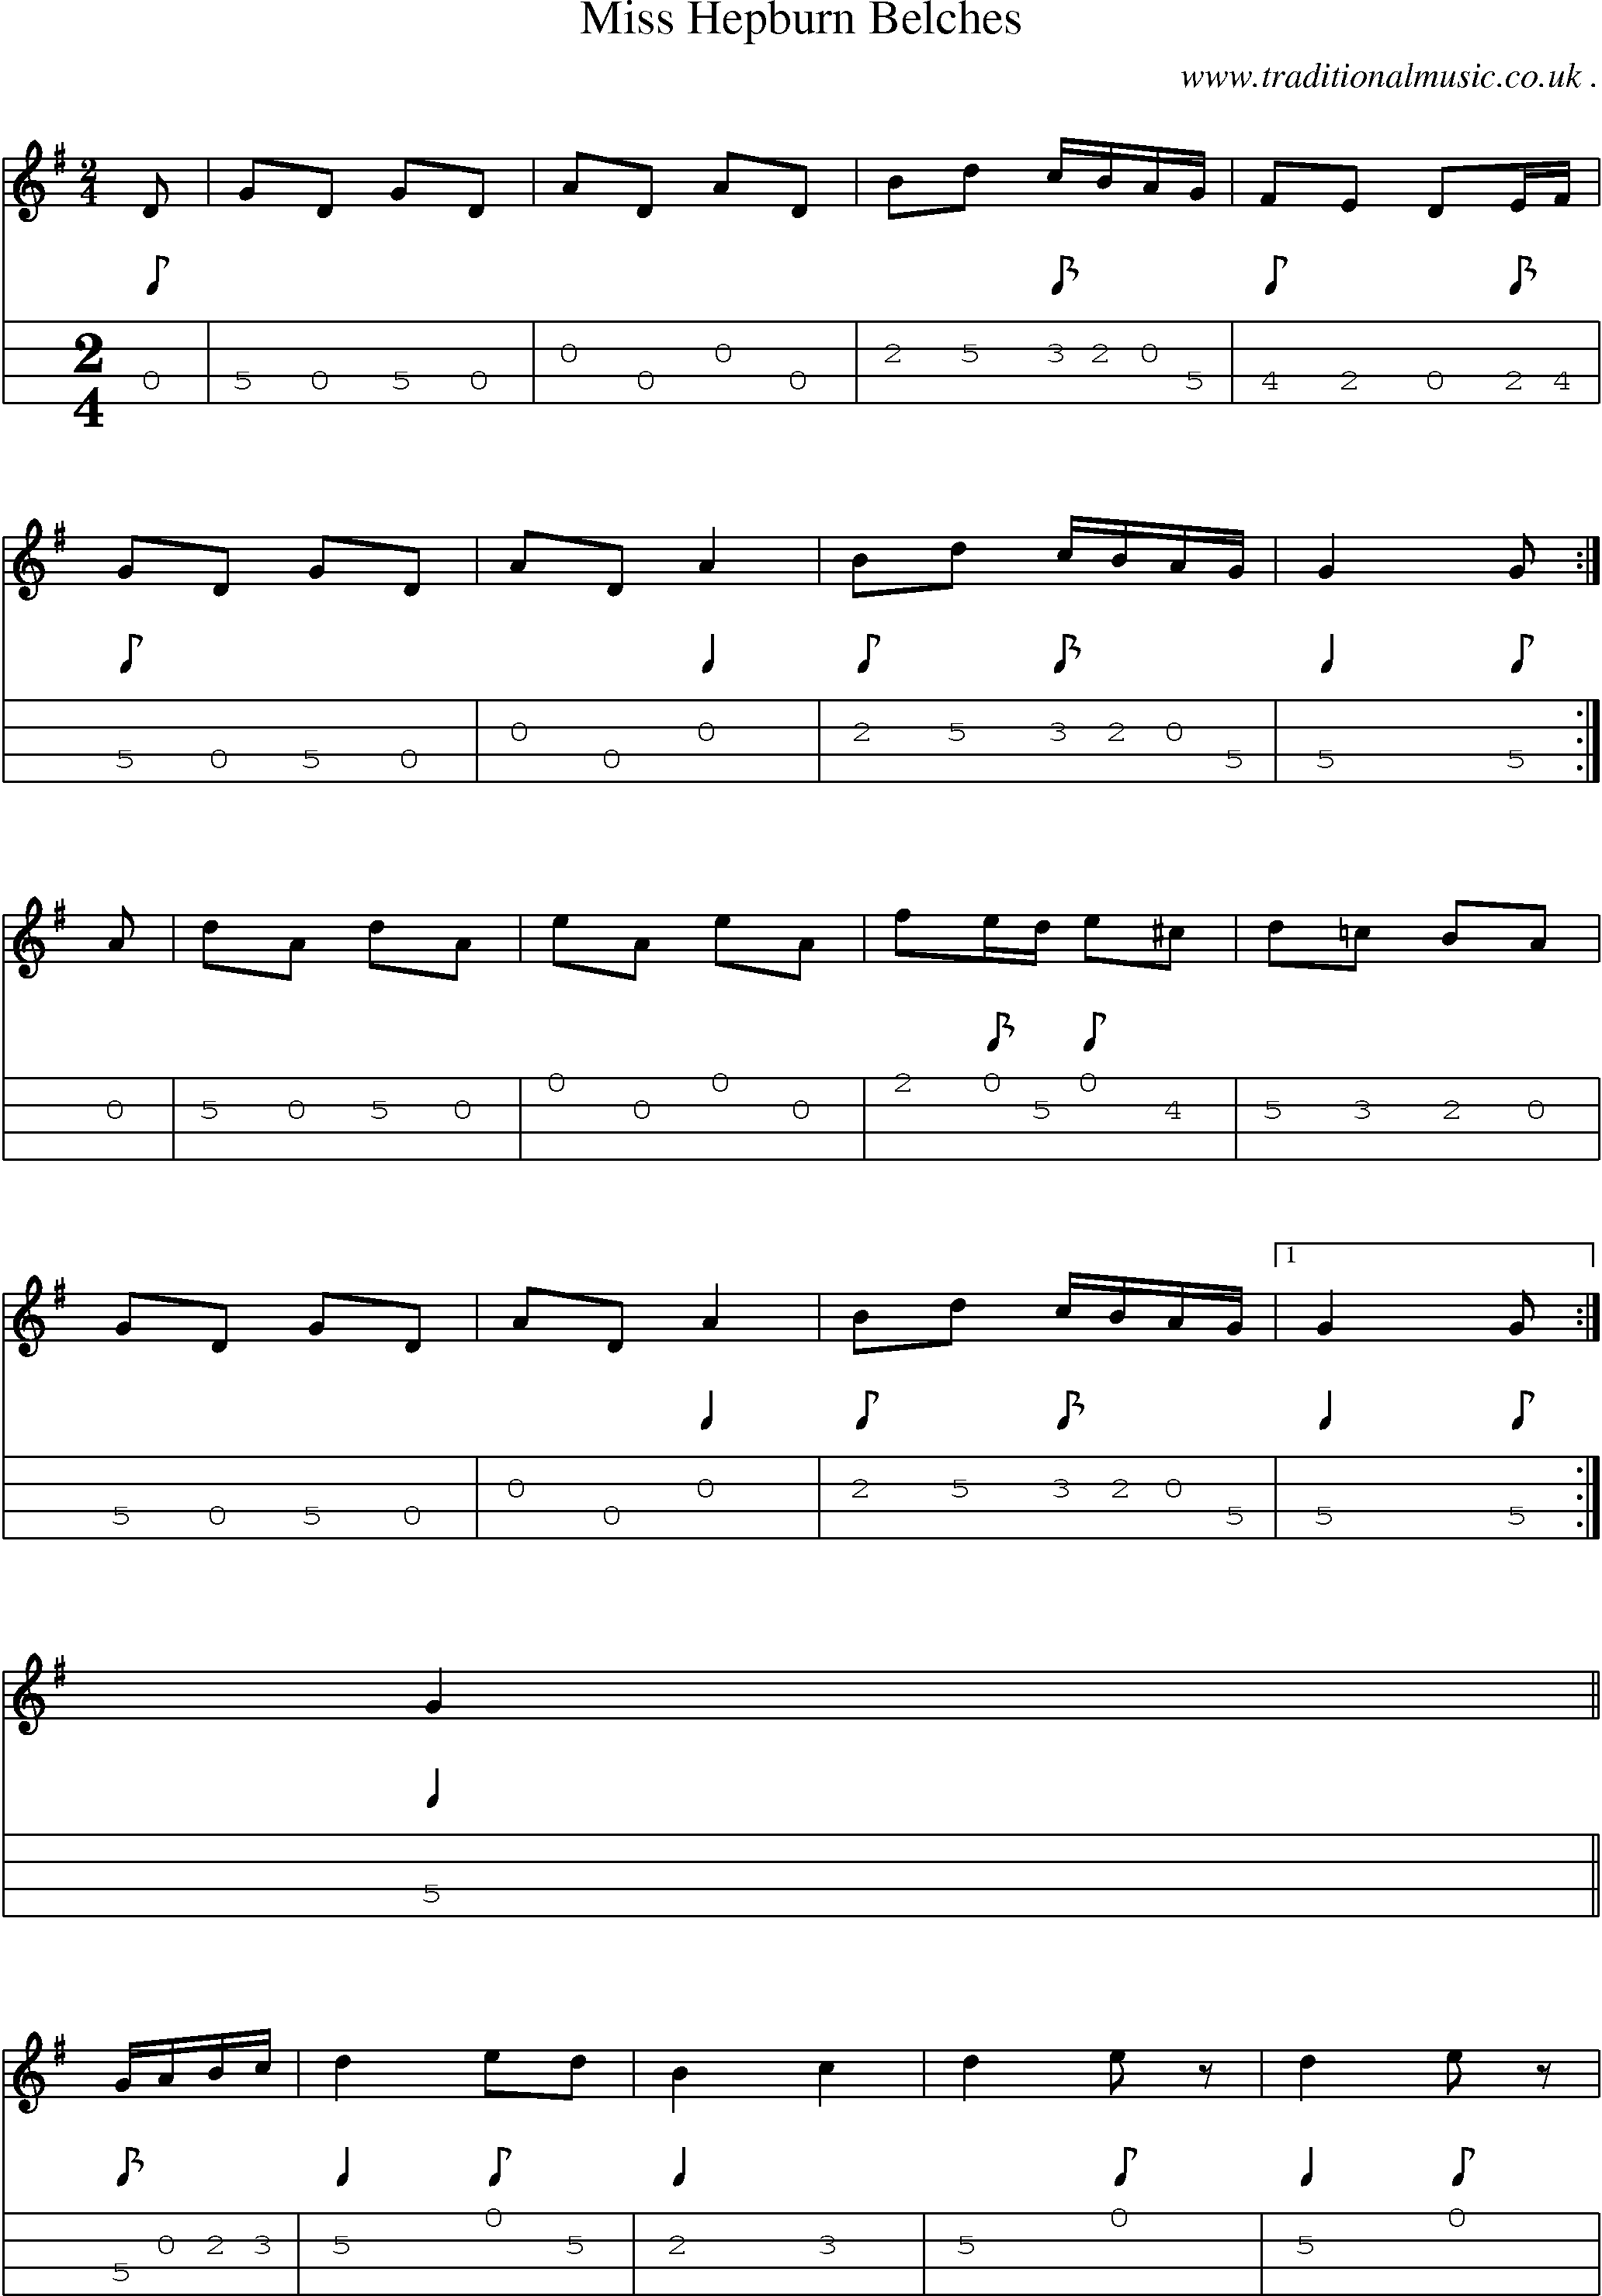 Sheet-music  score, Chords and Mandolin Tabs for Miss Hepburn Belches